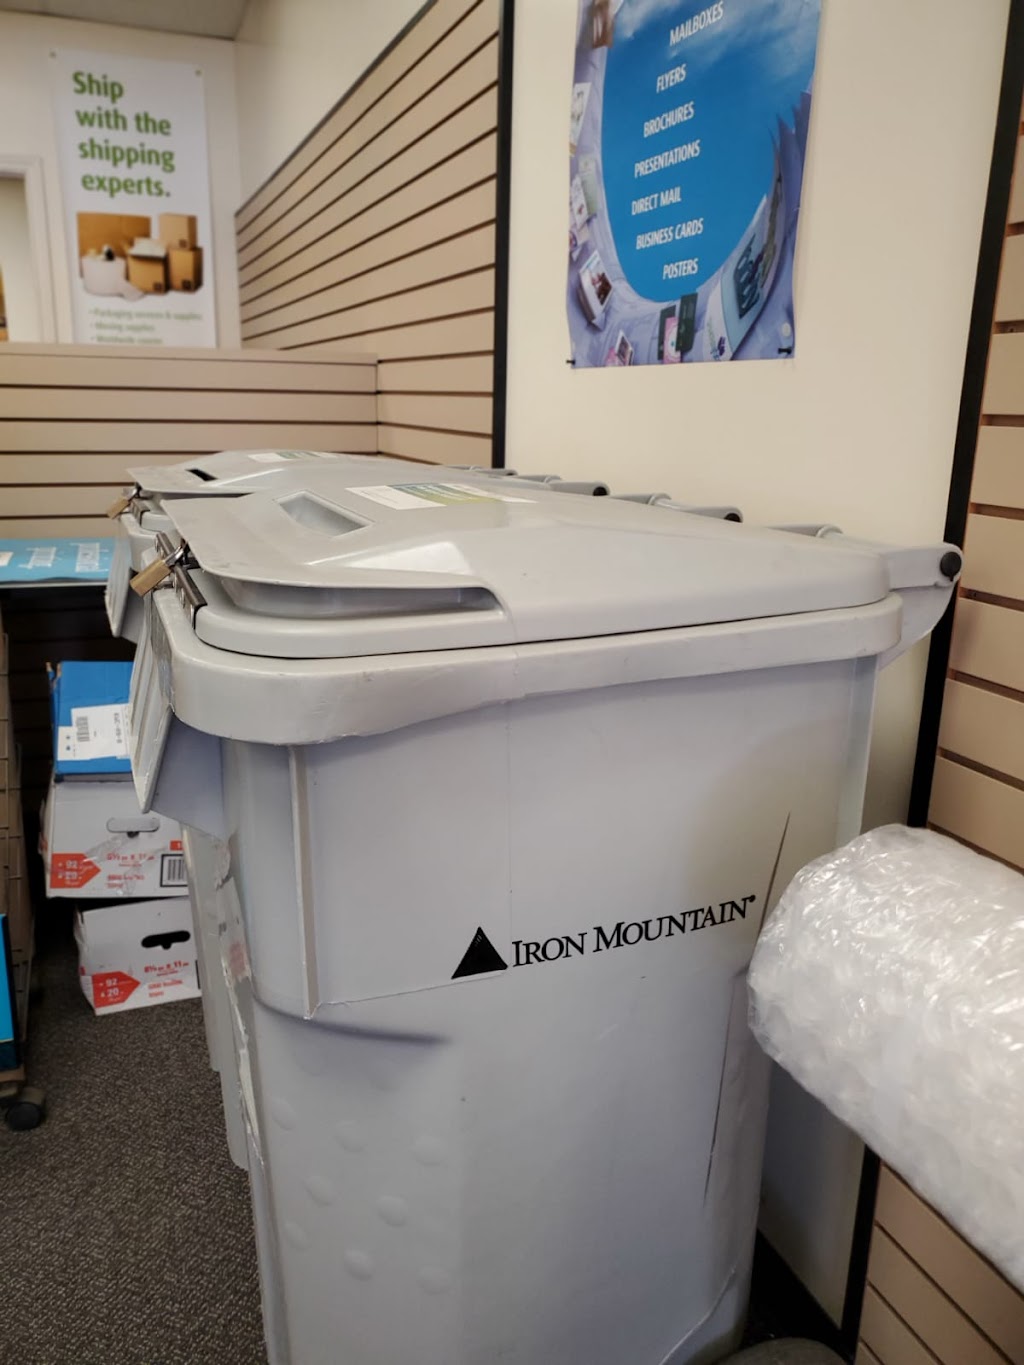 Shredding Service - Iron Mountain Approved Partner (Cambridge) | Located in: The UPS Store, 250 Dundas St S #6, Cambridge, ON N1R 8A8, Canada | Phone: (519) 624-1122